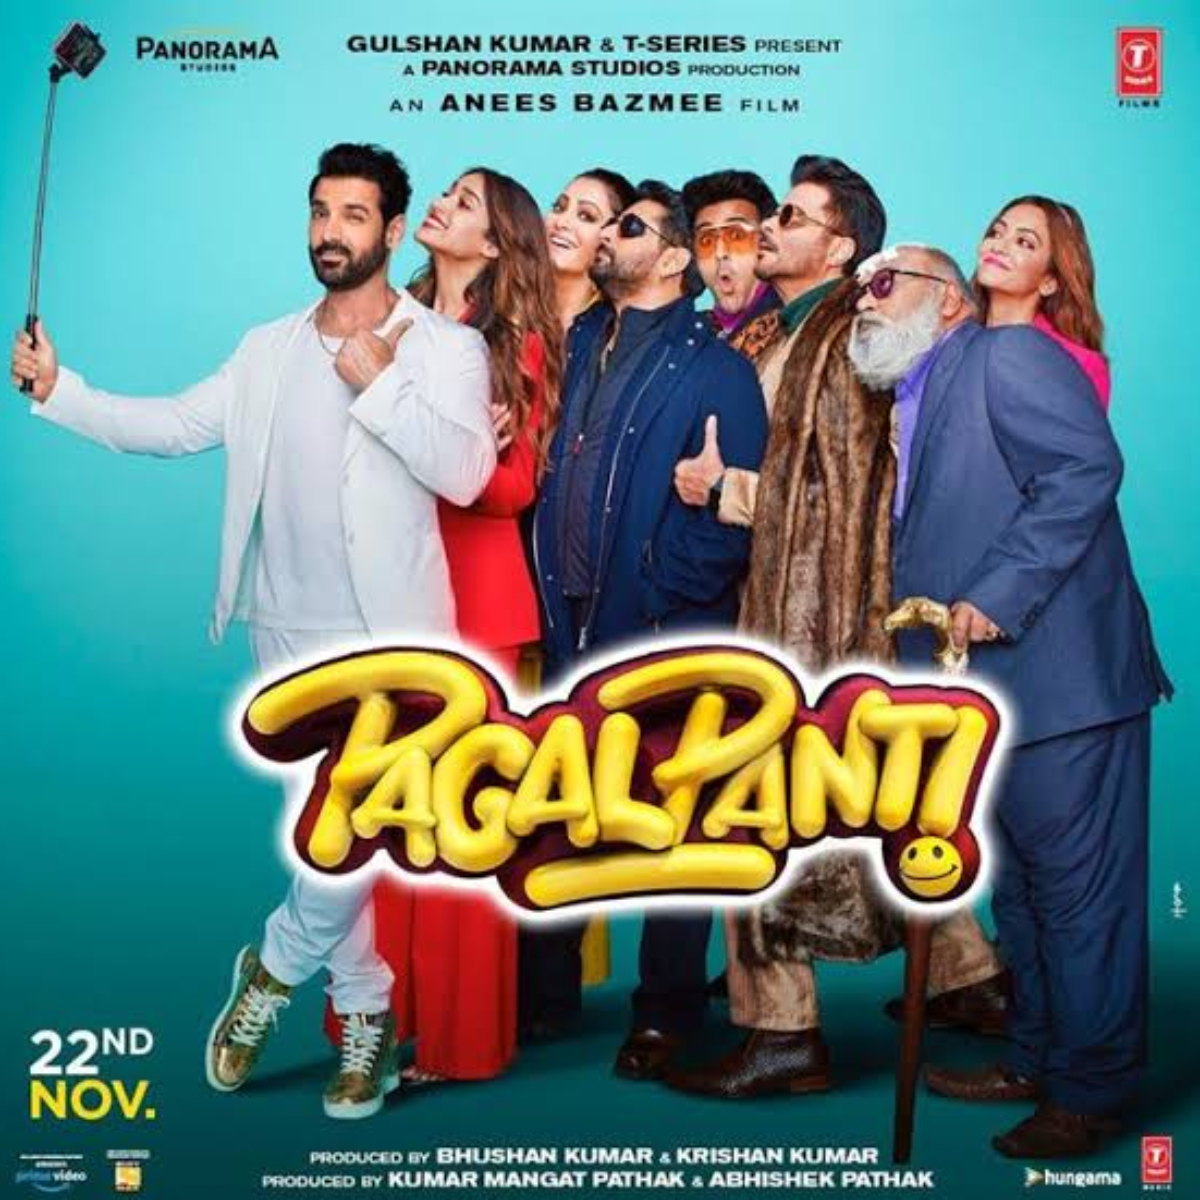 Pagalpanti Movie Review: Anees Bazmee directorial is marred by its length and insipid writing